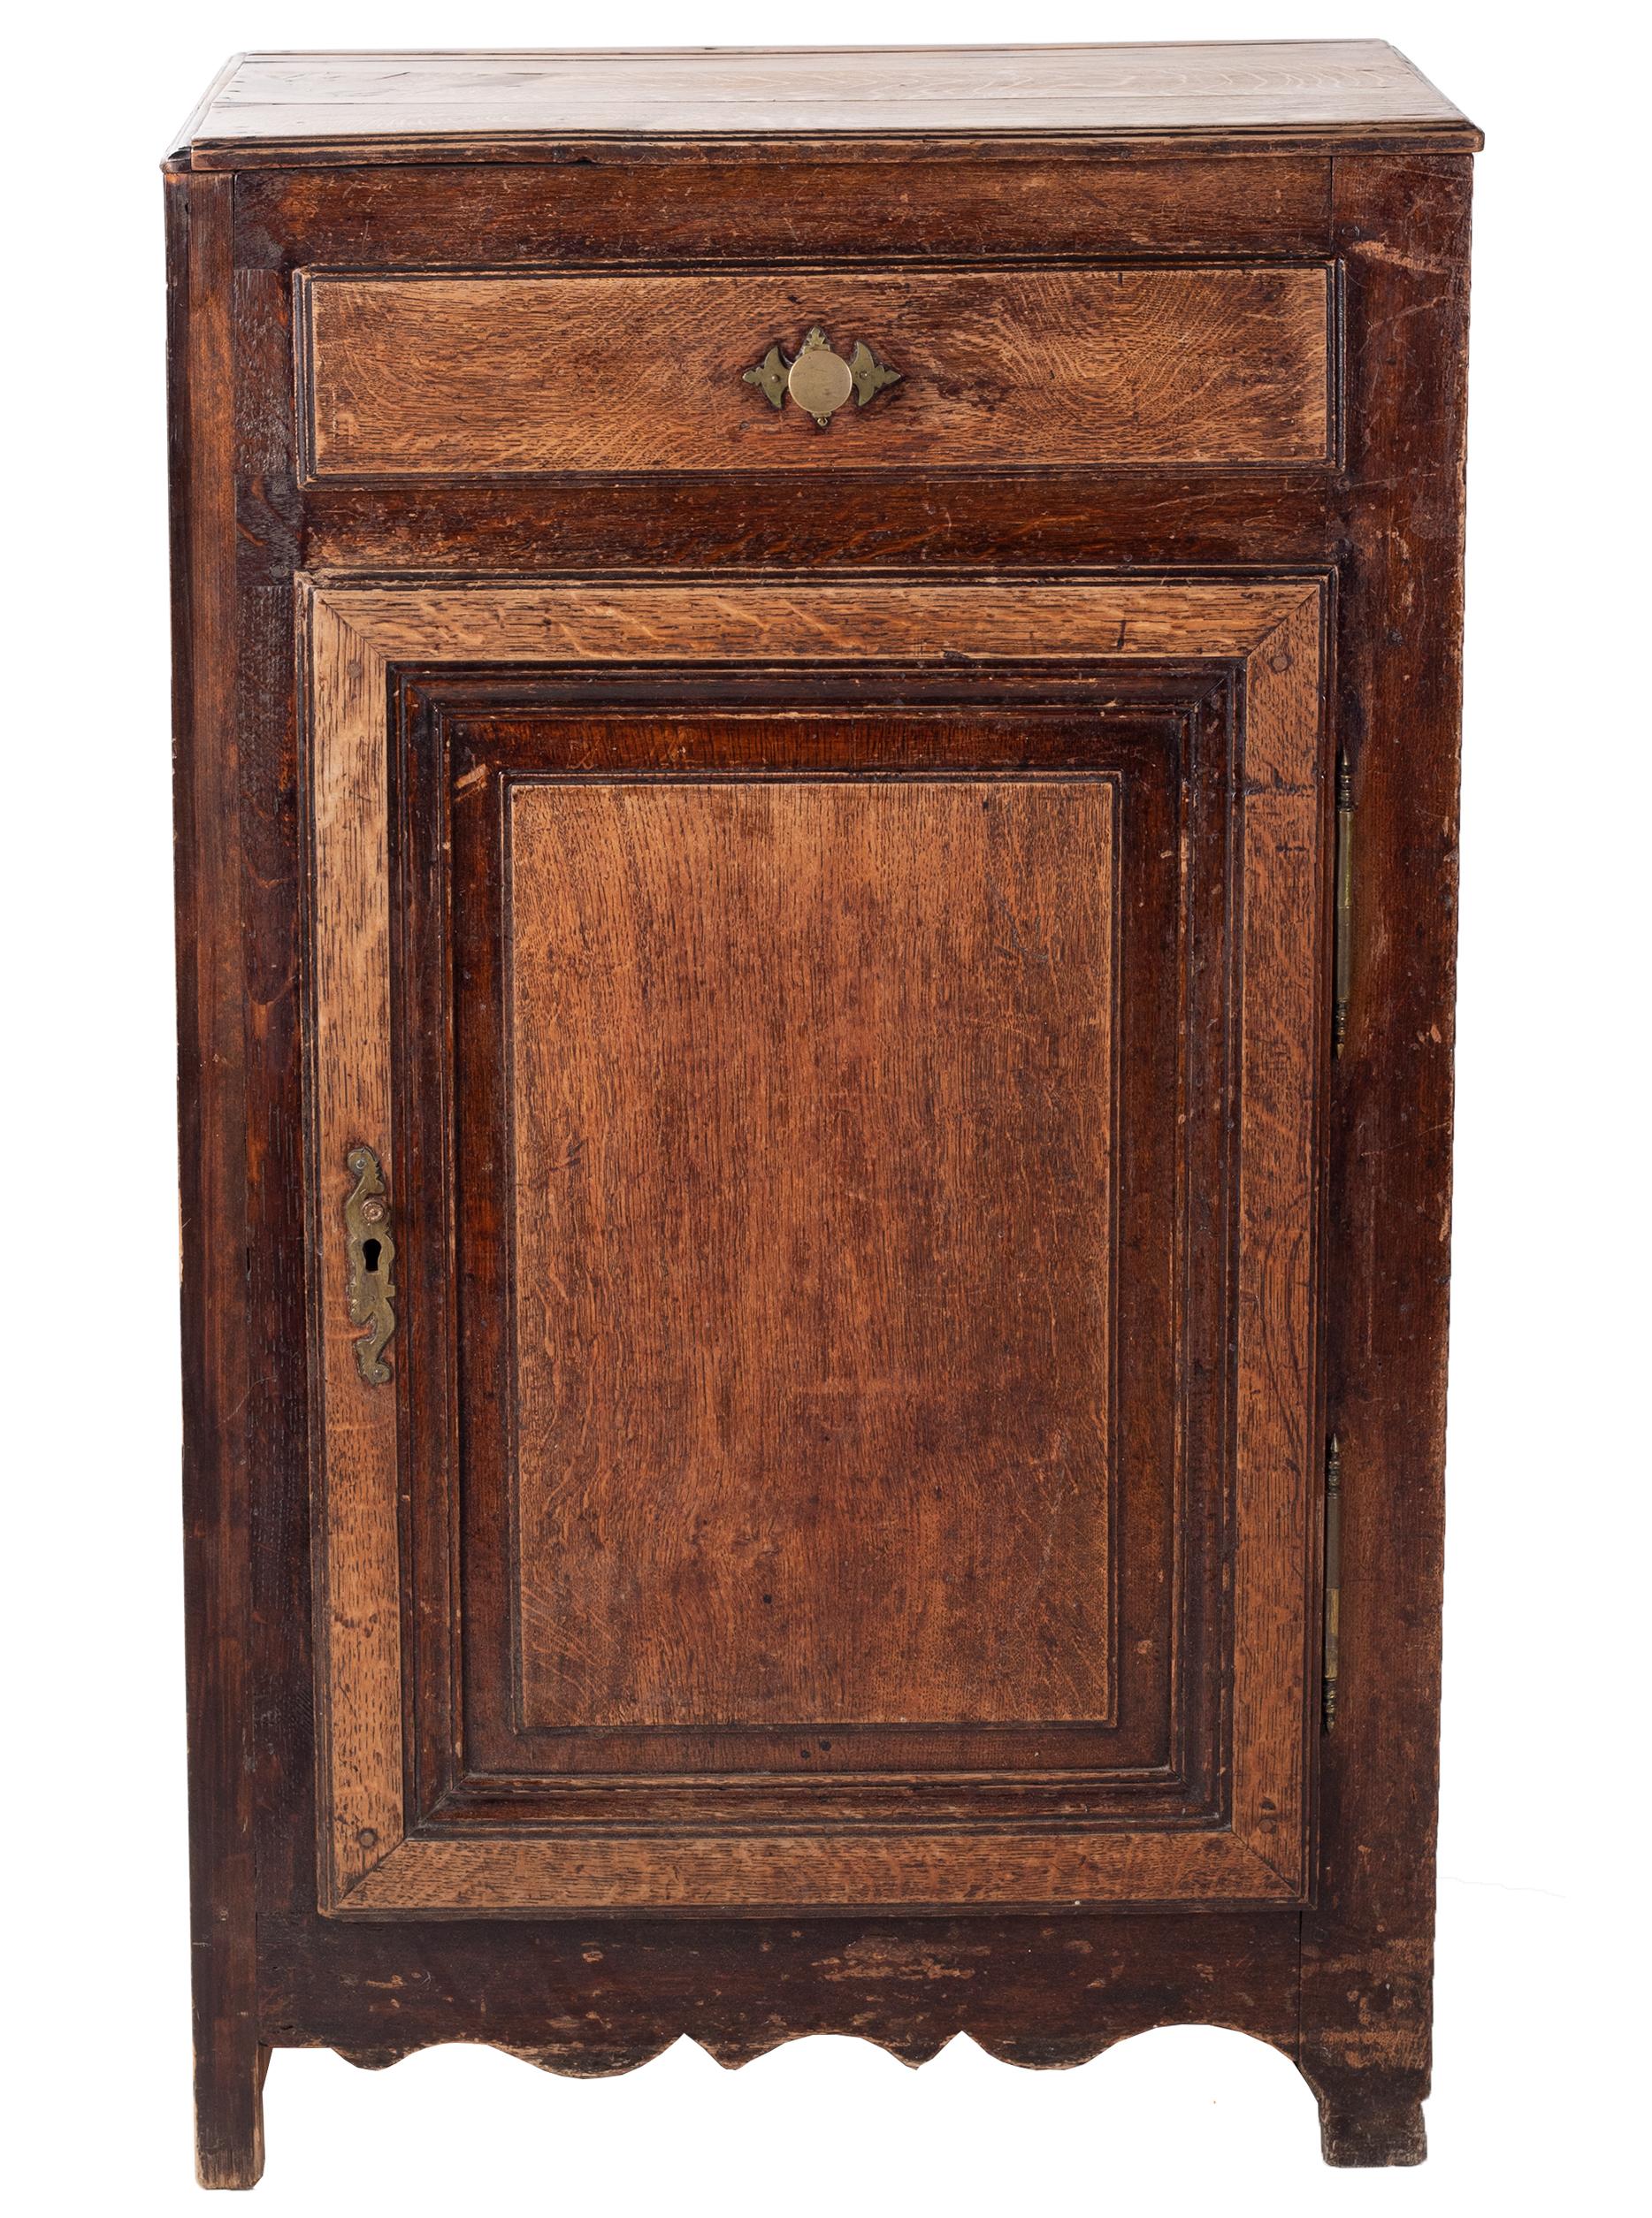 19th century one drawer and one door French cabinet.